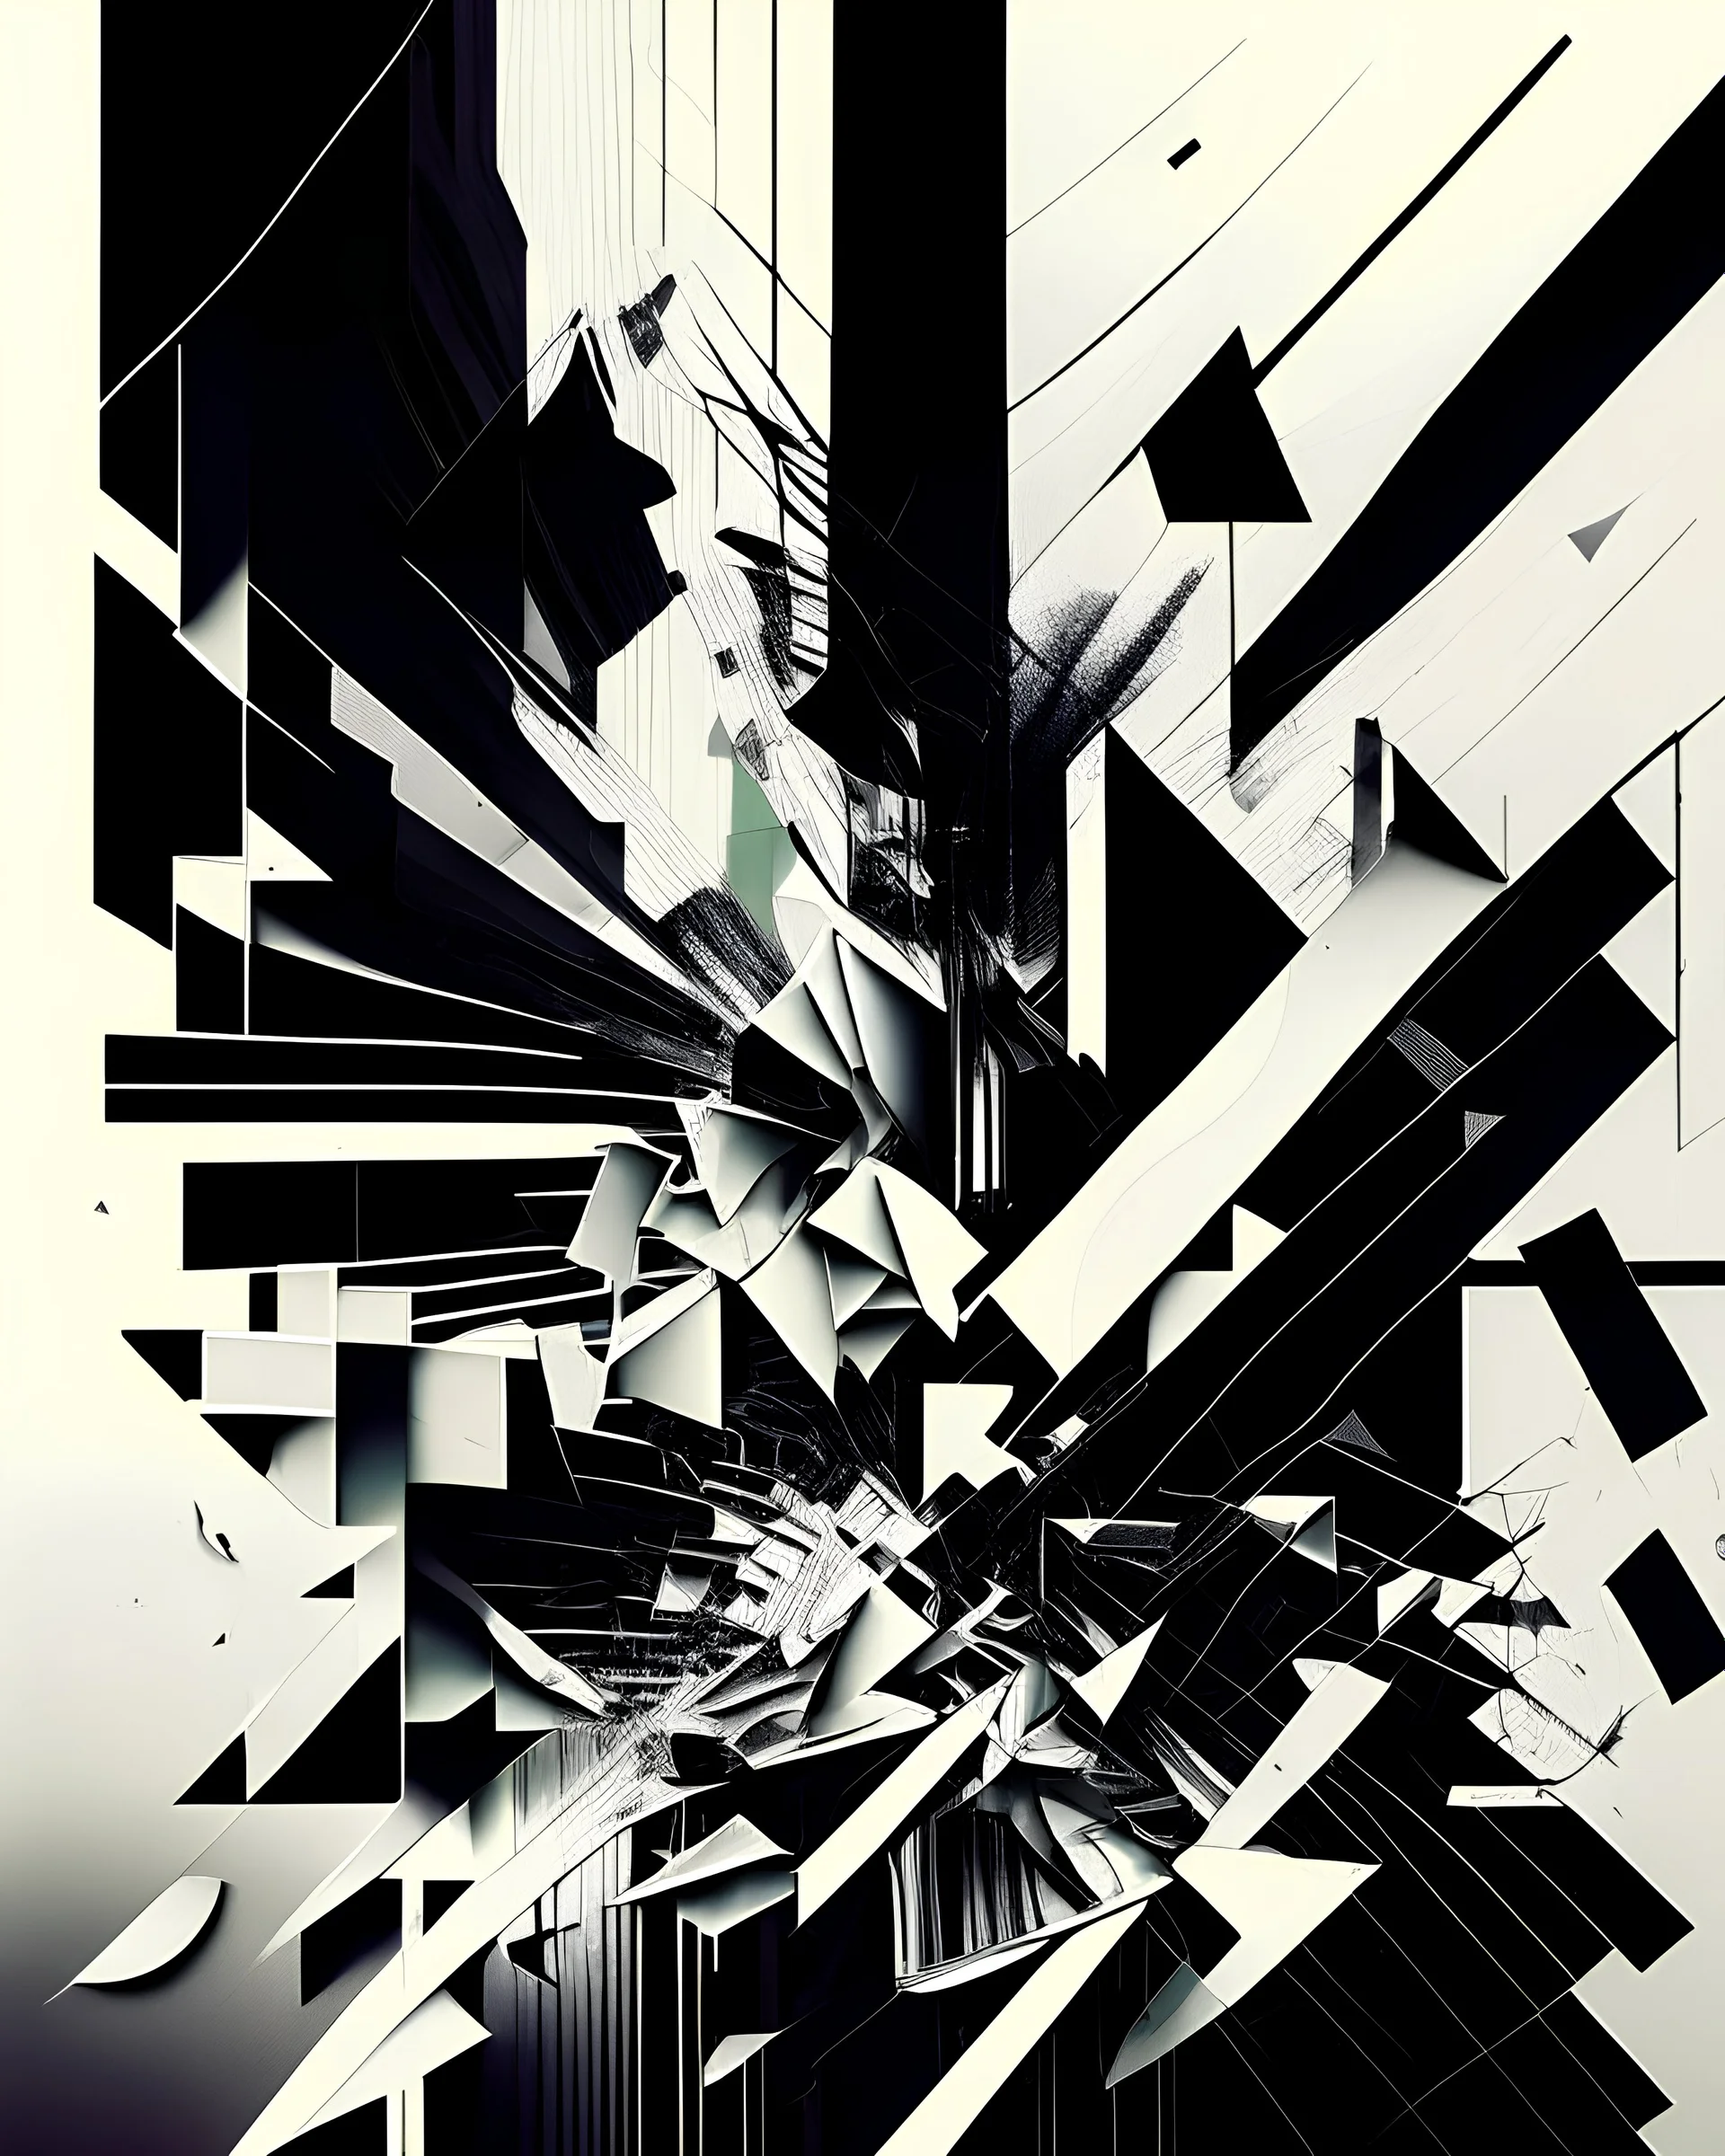 joy division theme chaotic asymmetrical geometrical art with glitch elements